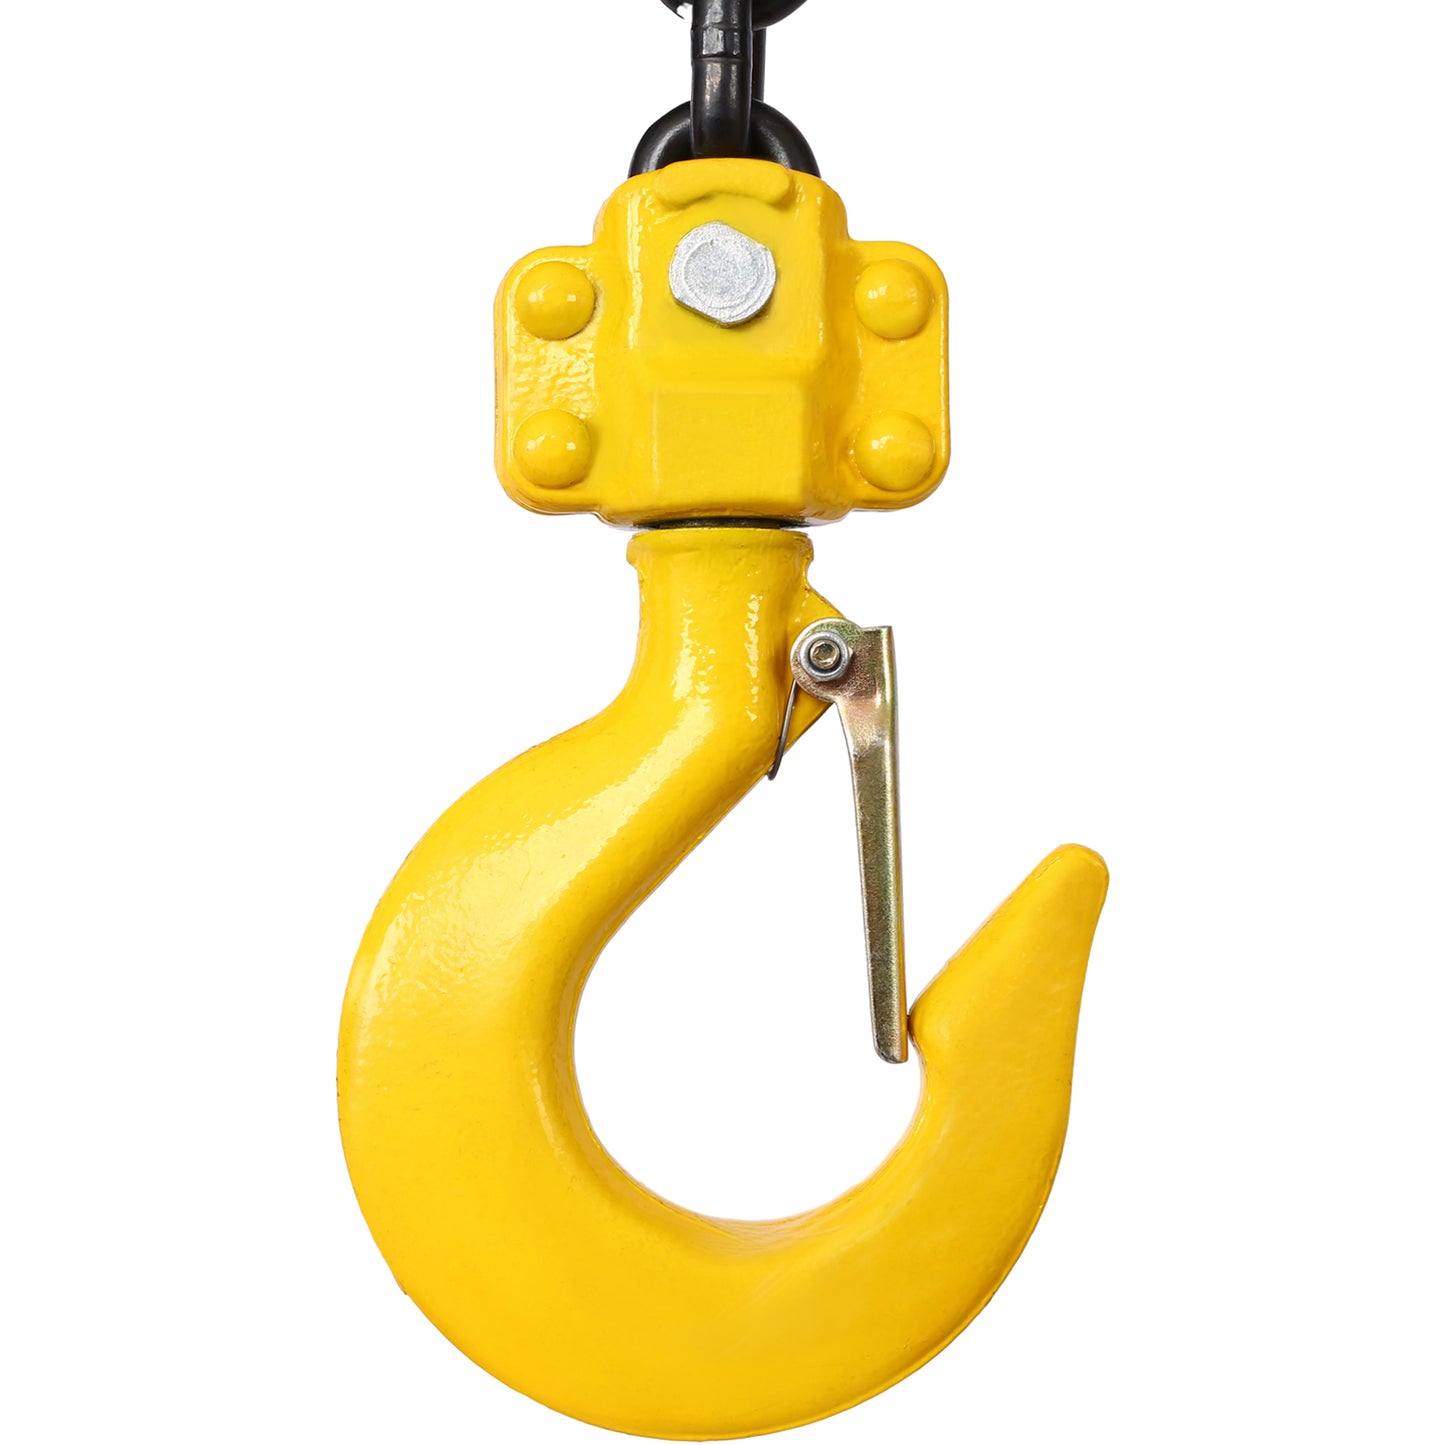 Lever Chain Hoist  1 1/2 Ton 3300LBS Capacity 5 FT Chain Come Along with Heavy Duty Hooks Ratchet Lever Chain Block Hoist Lift Puller